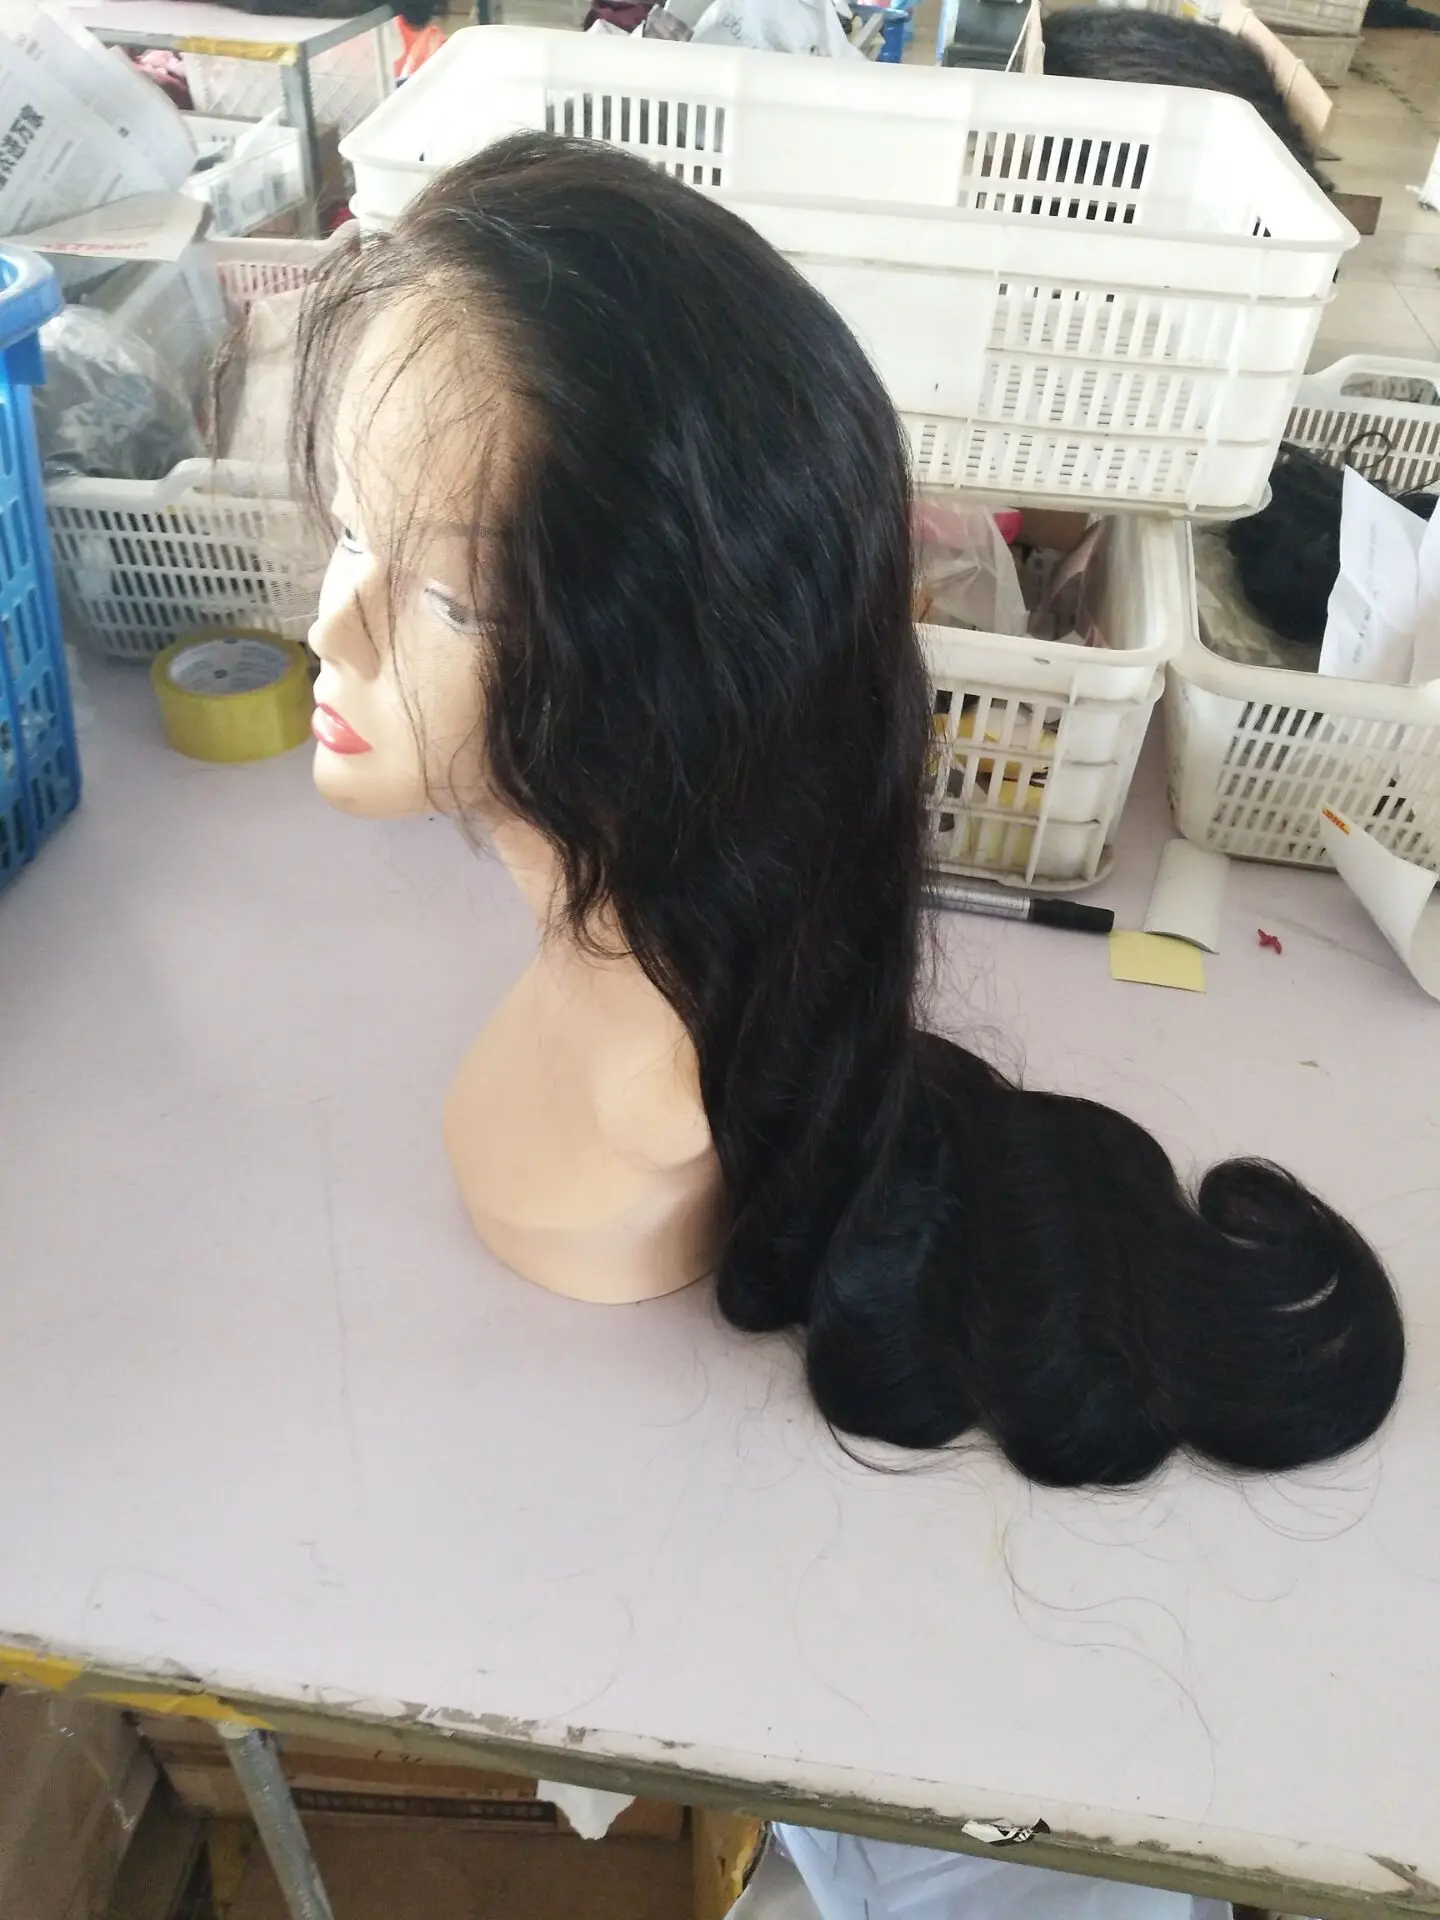 A Best Sale Body Wave Human Hair Wig Stock - Buy Body Wave Human Hair Wig,Human Hair Brazillian Body Waves Wig,Full Lace Body Wave Wig Product Alibaba.com